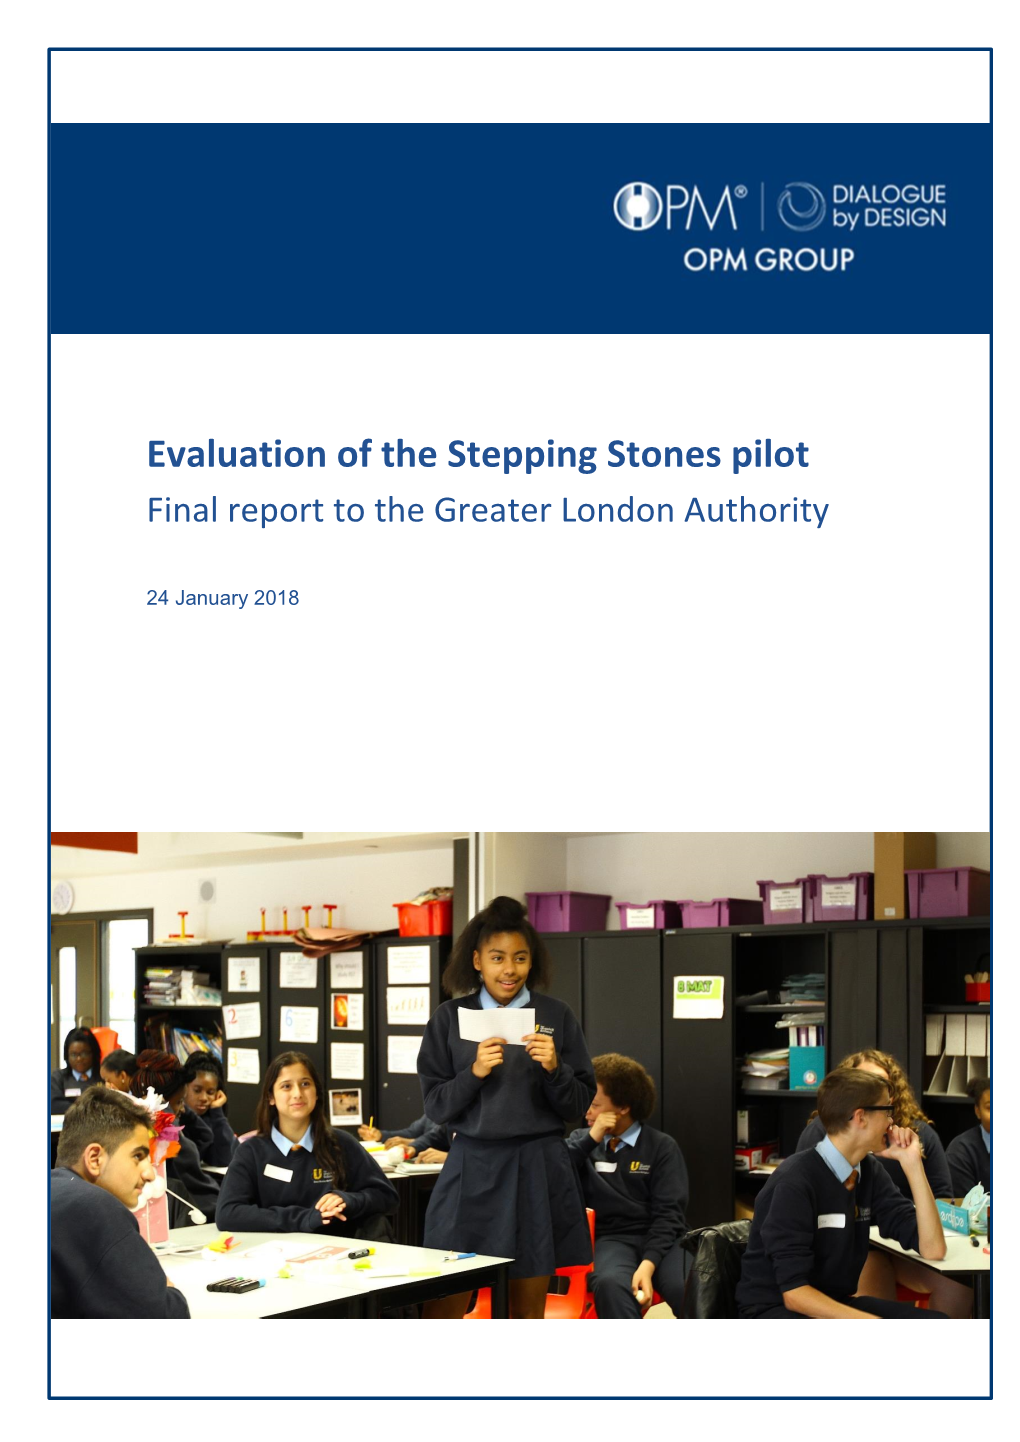 Evaluation of the Stepping Stones Pilot Final Report to the Greater London Authority